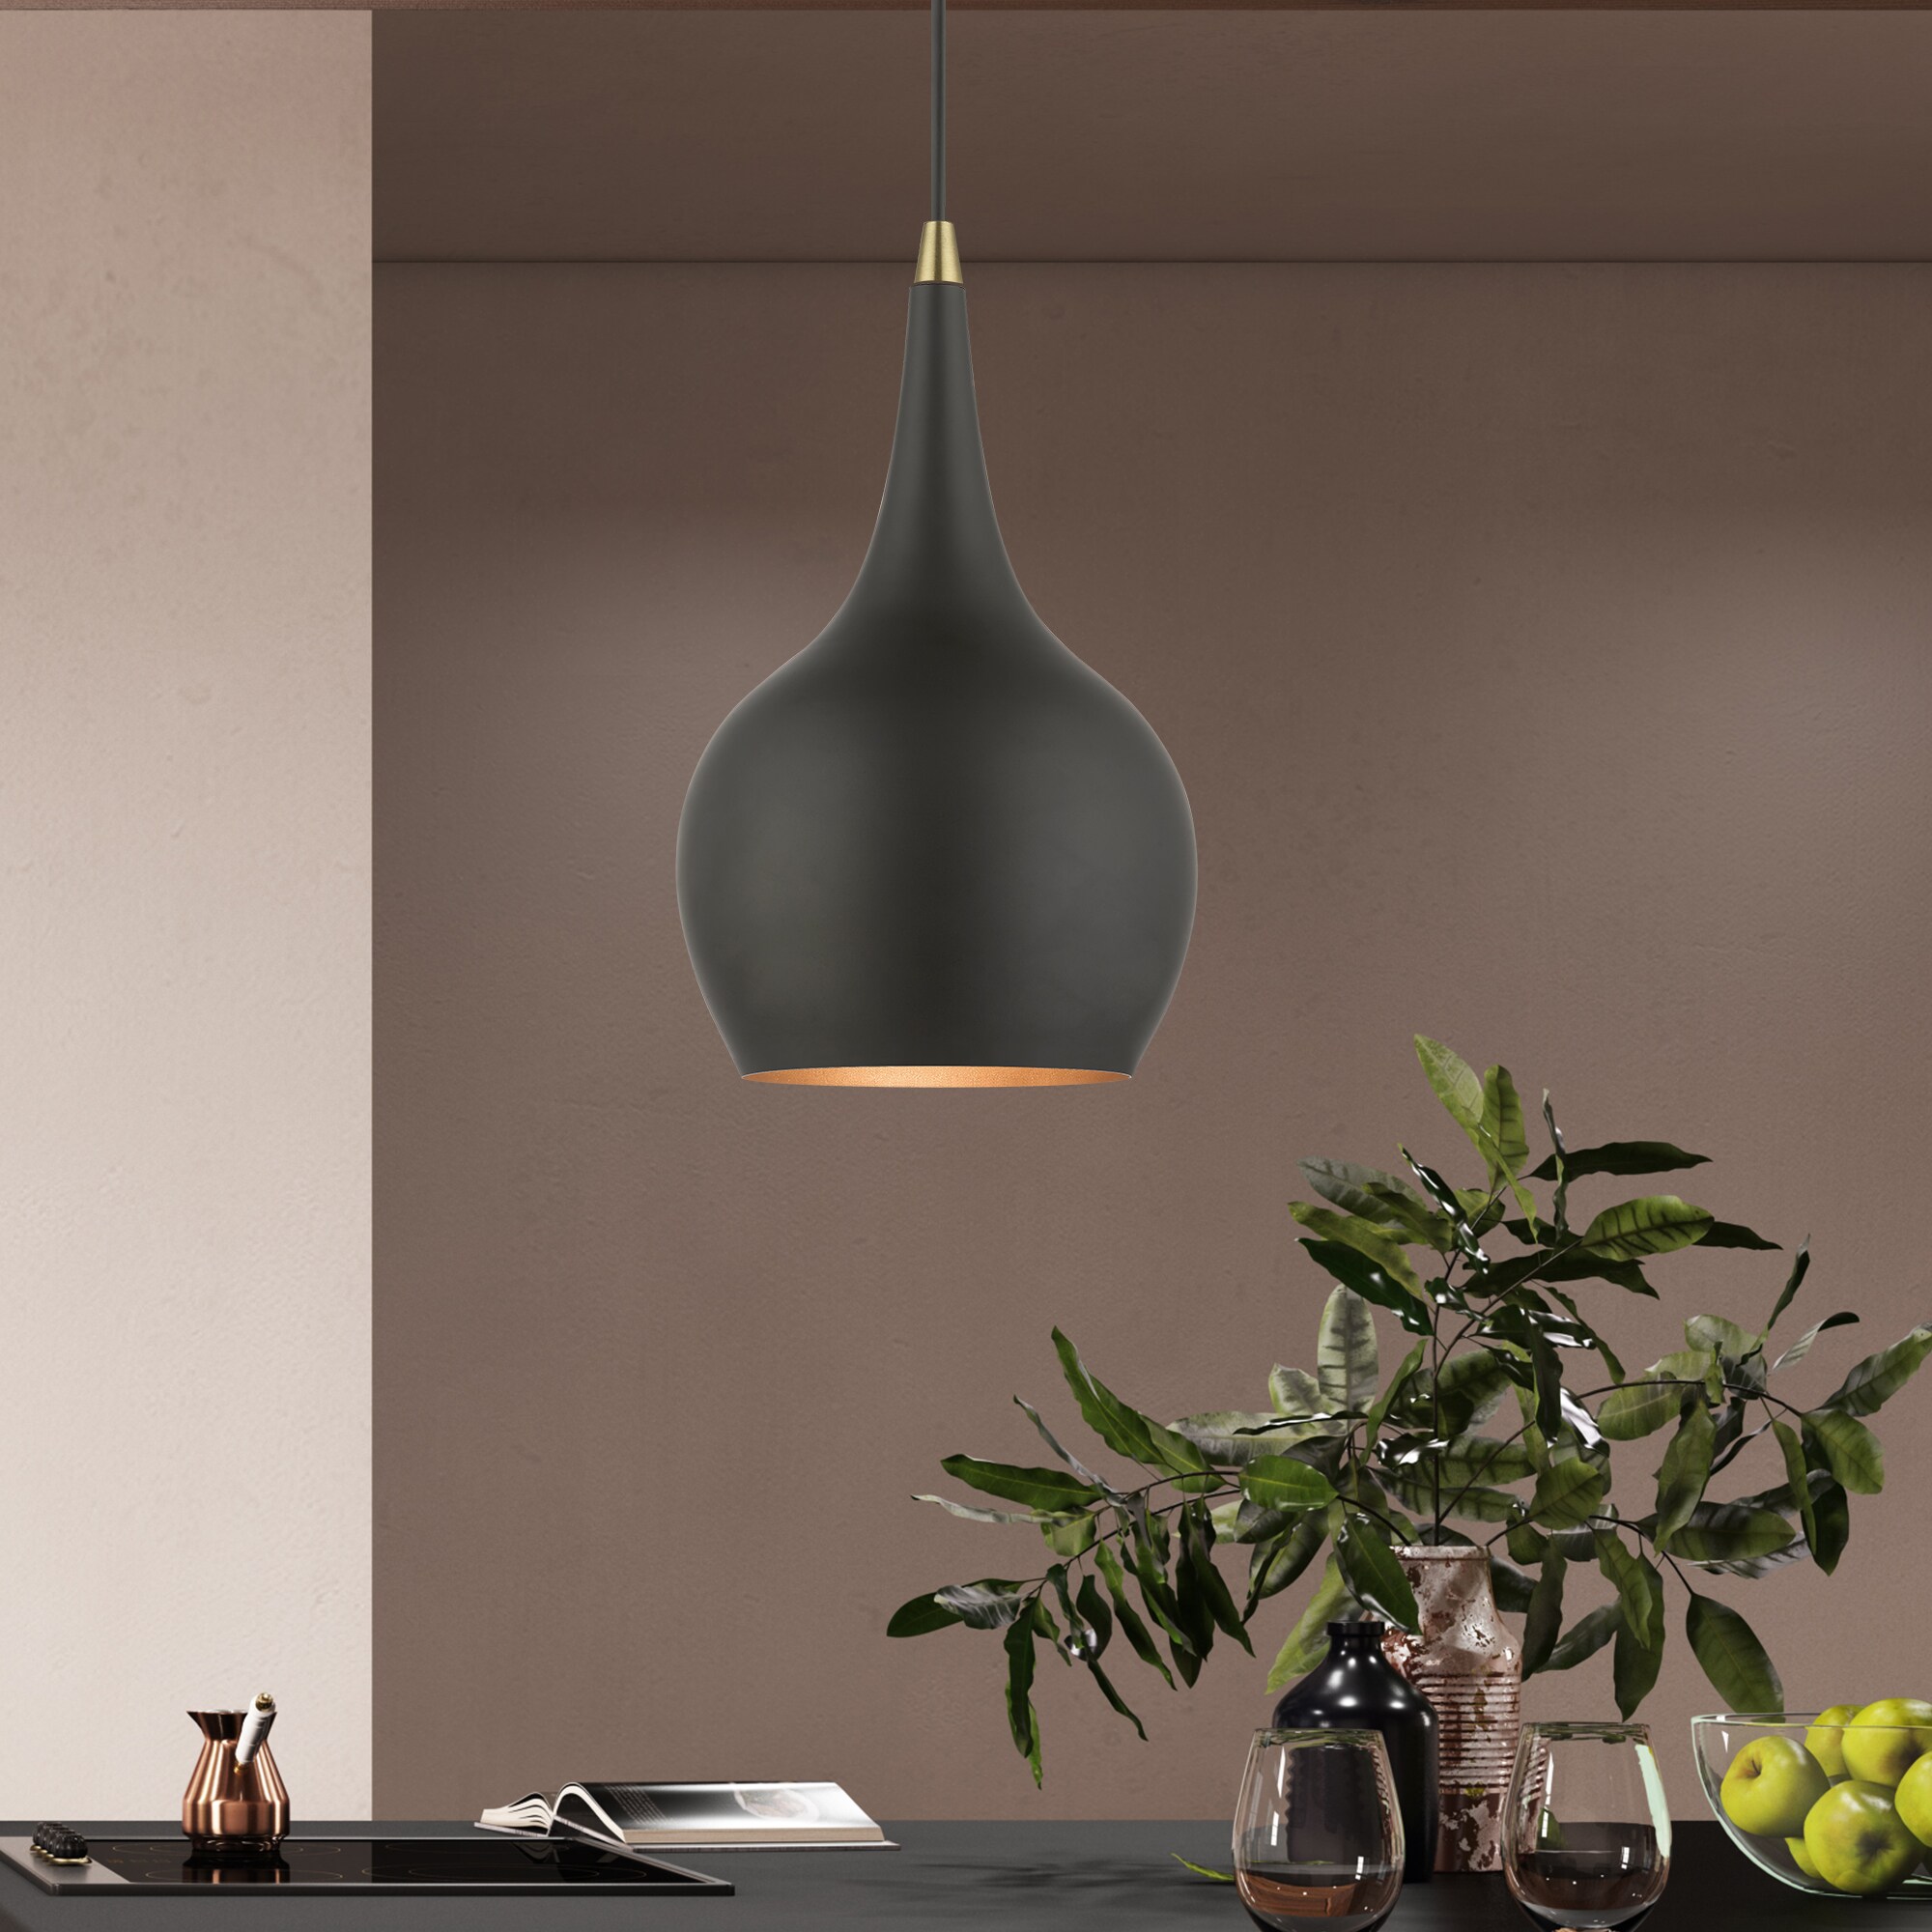 Livex Lighting Andes Black with Antique Brass Accents Industrial 